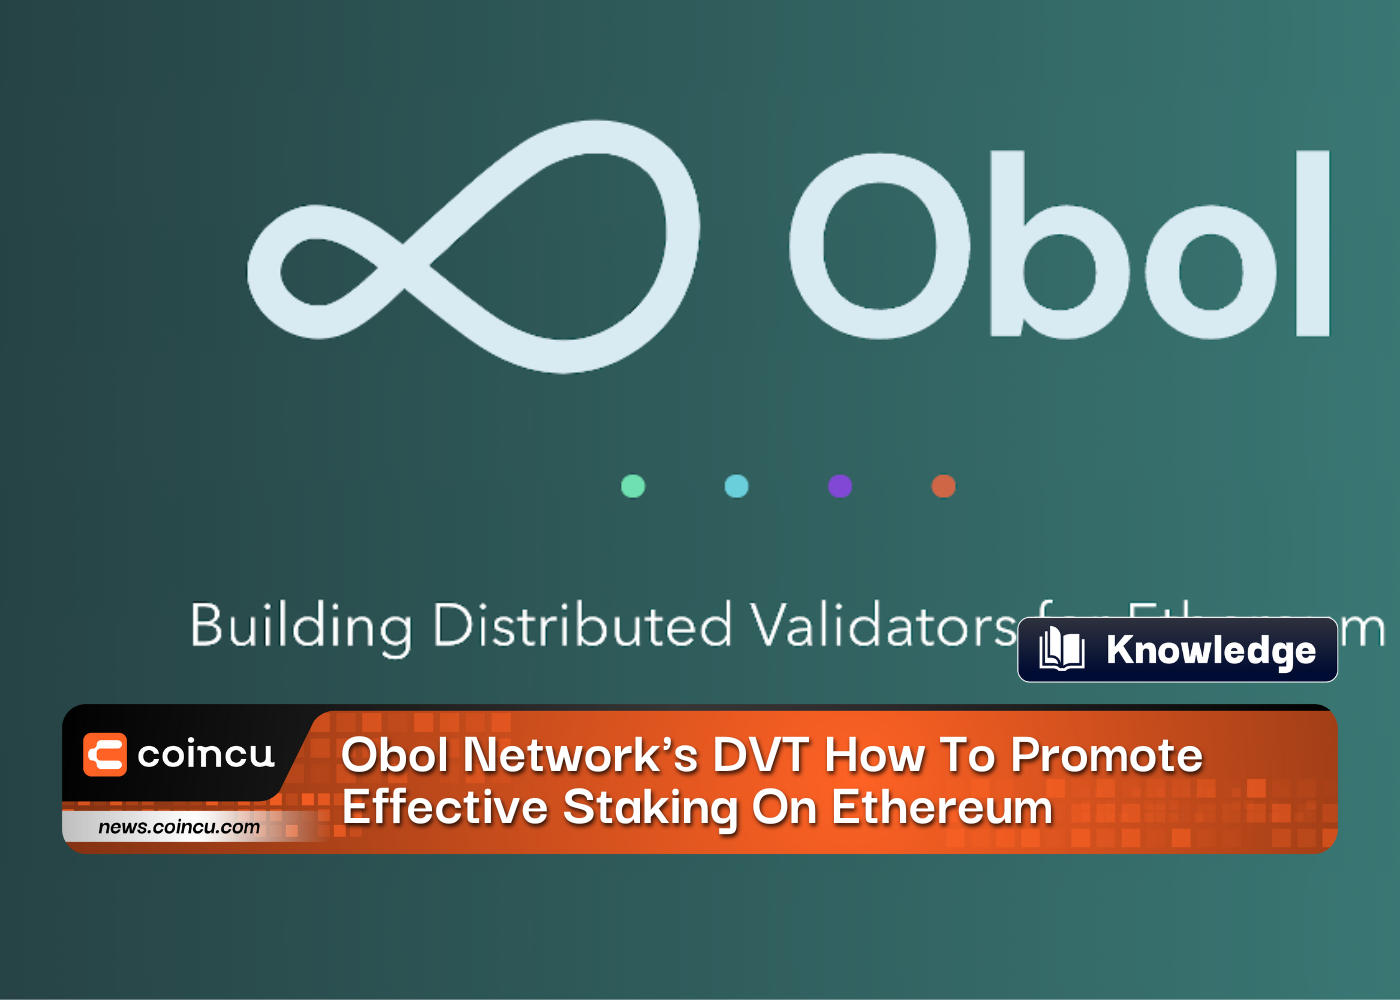 Obol Network's DVT How To Promote Effective Staking On Ethereum